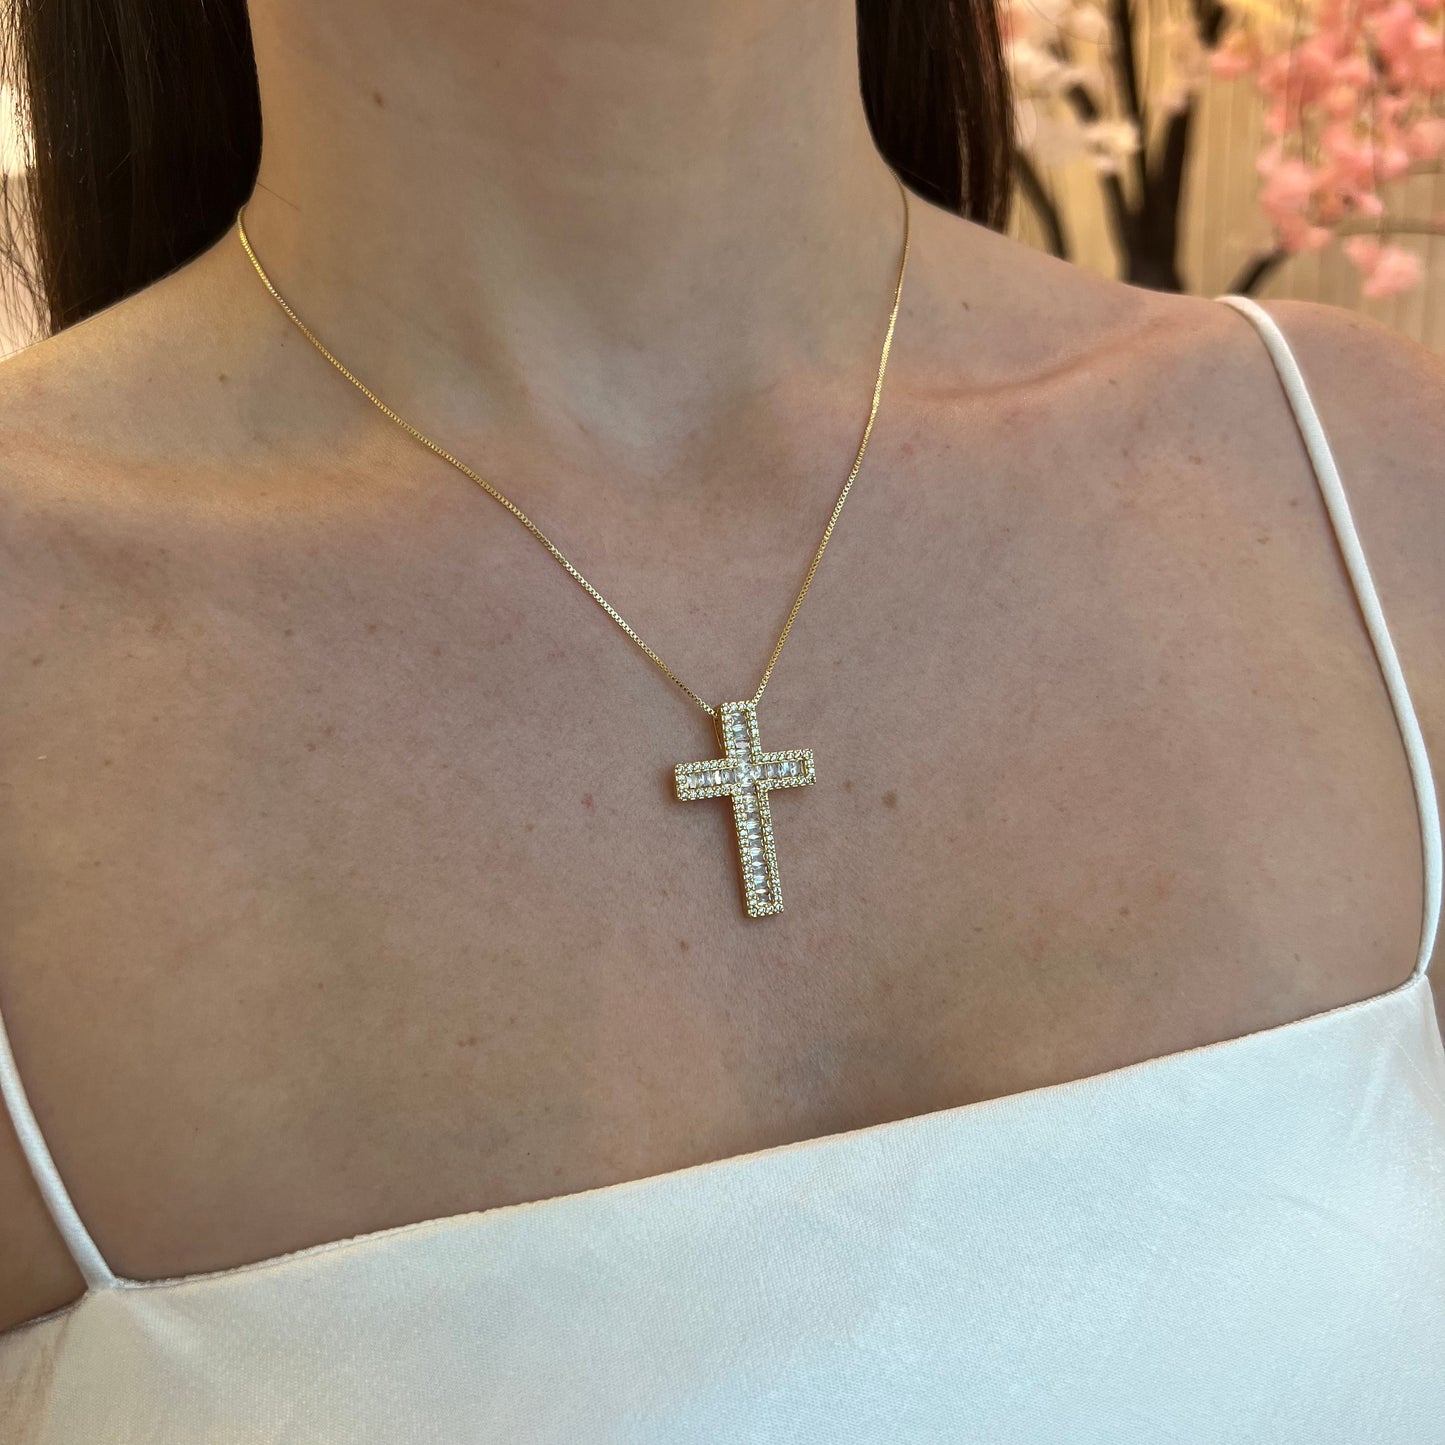 LUXURIOUS CROSS NECKLACE | 18K Gold Plated